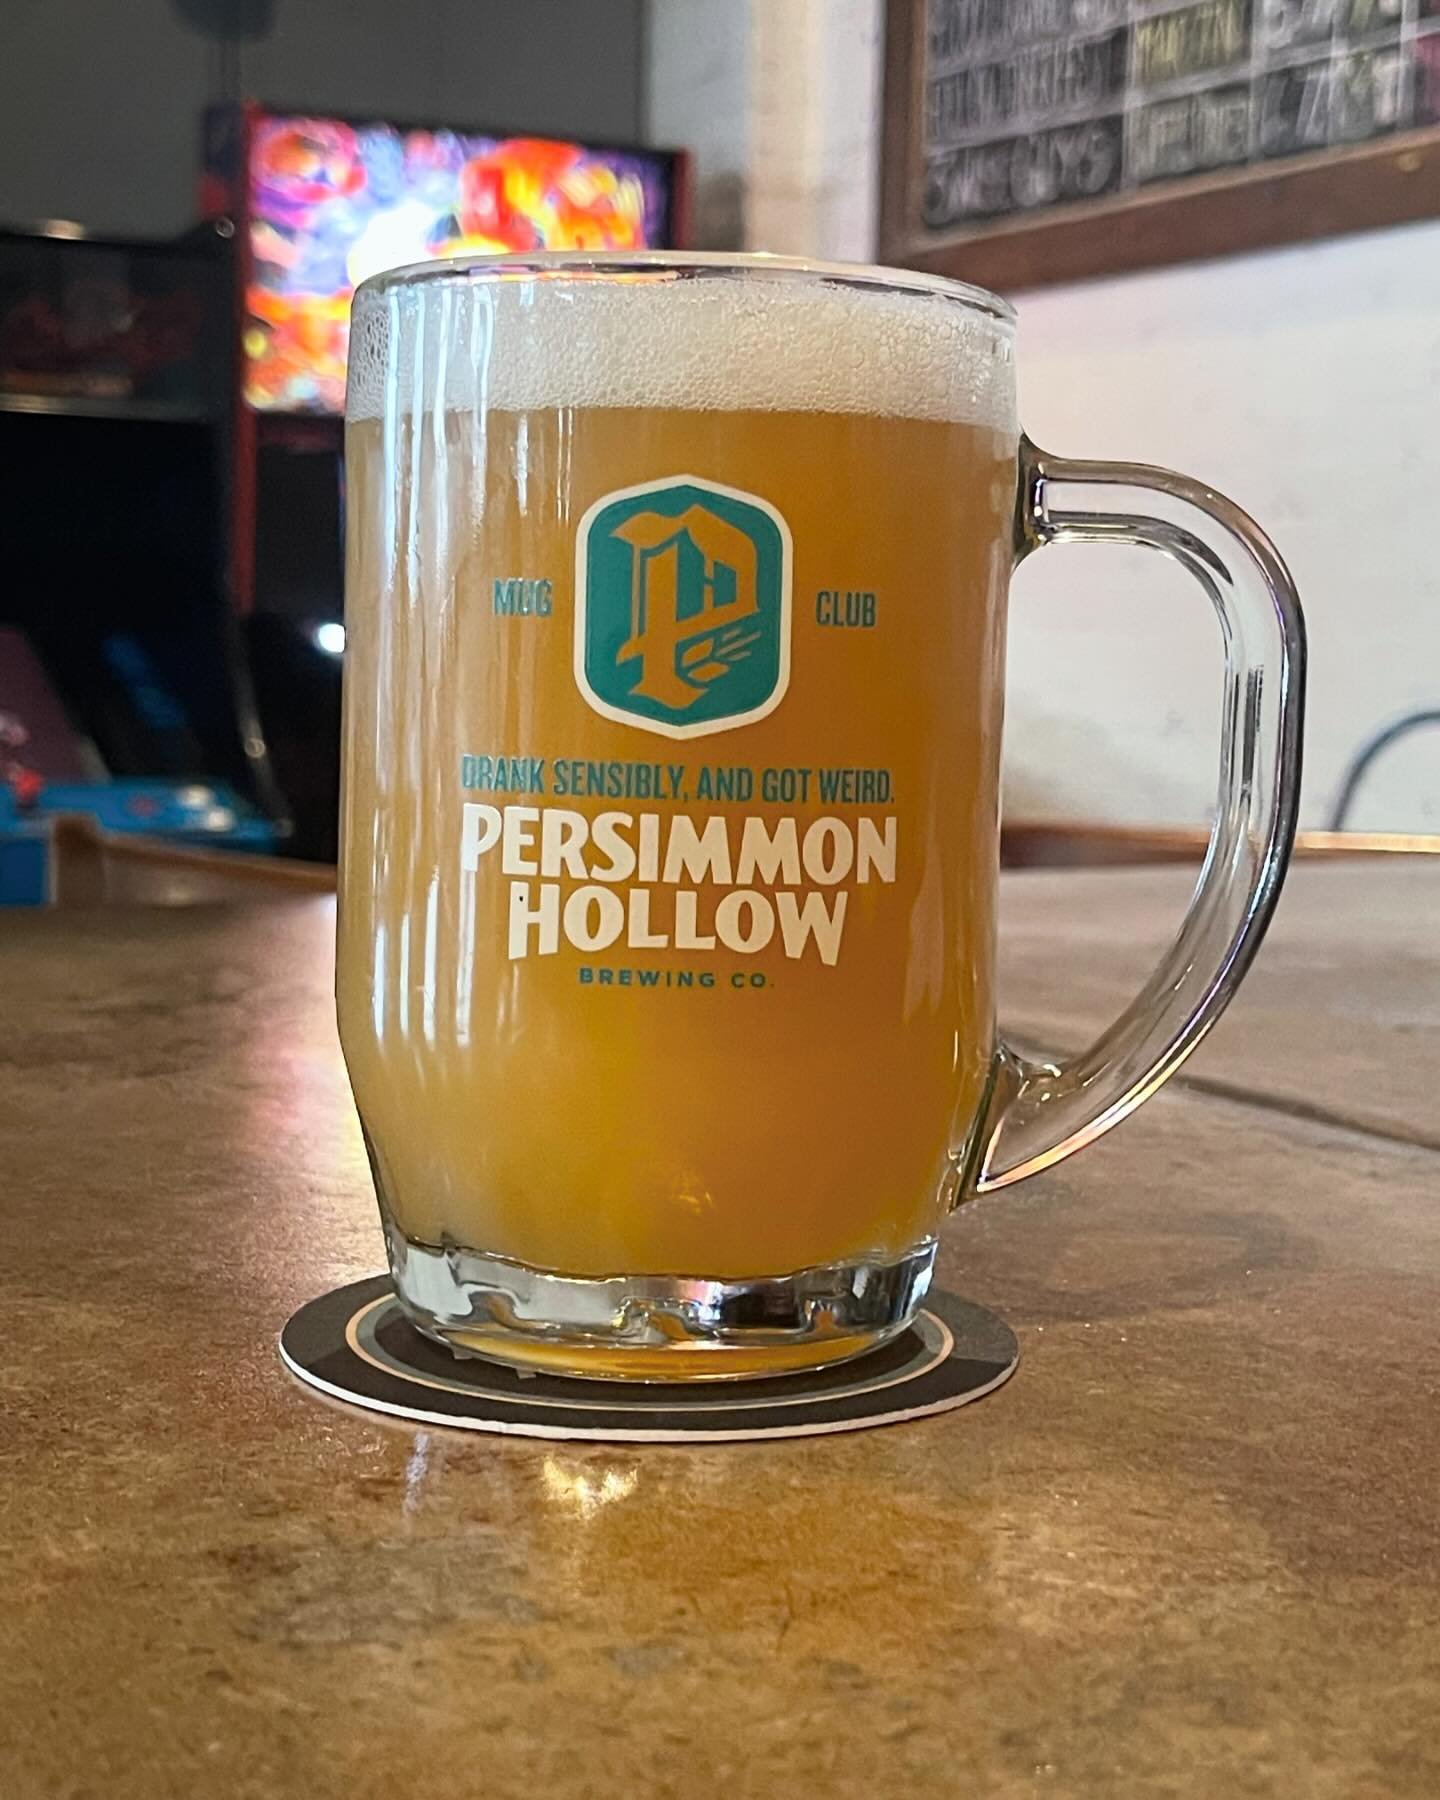 Mug club Monday exclusive release!

Seville Hiker
5.8%
This month we took Southbound Hiker and turned up the citrus. Aromas of fresh orange blossoms with even more intense flavors of fresh orange juice. 

Available to mug club members today, and ever